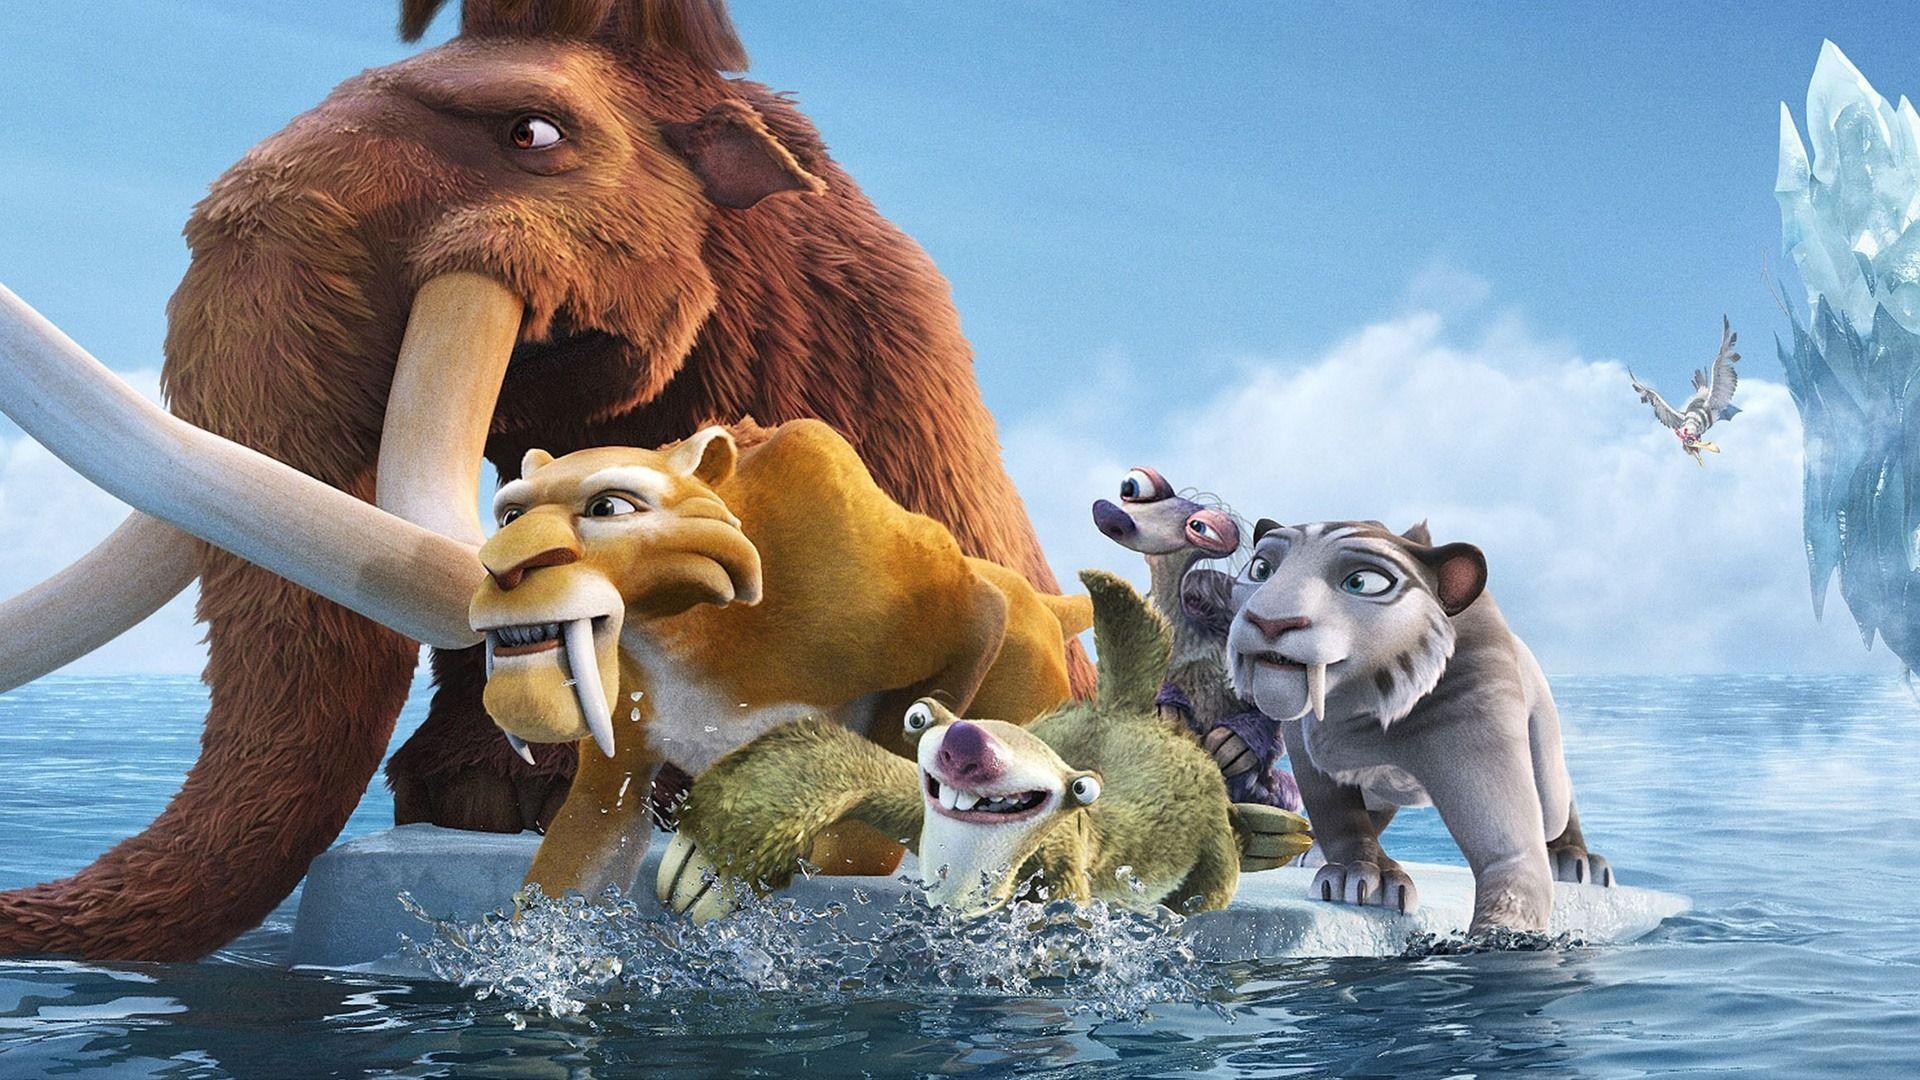 Ice Age: Continental Drift Wallpaper, Picture, Image